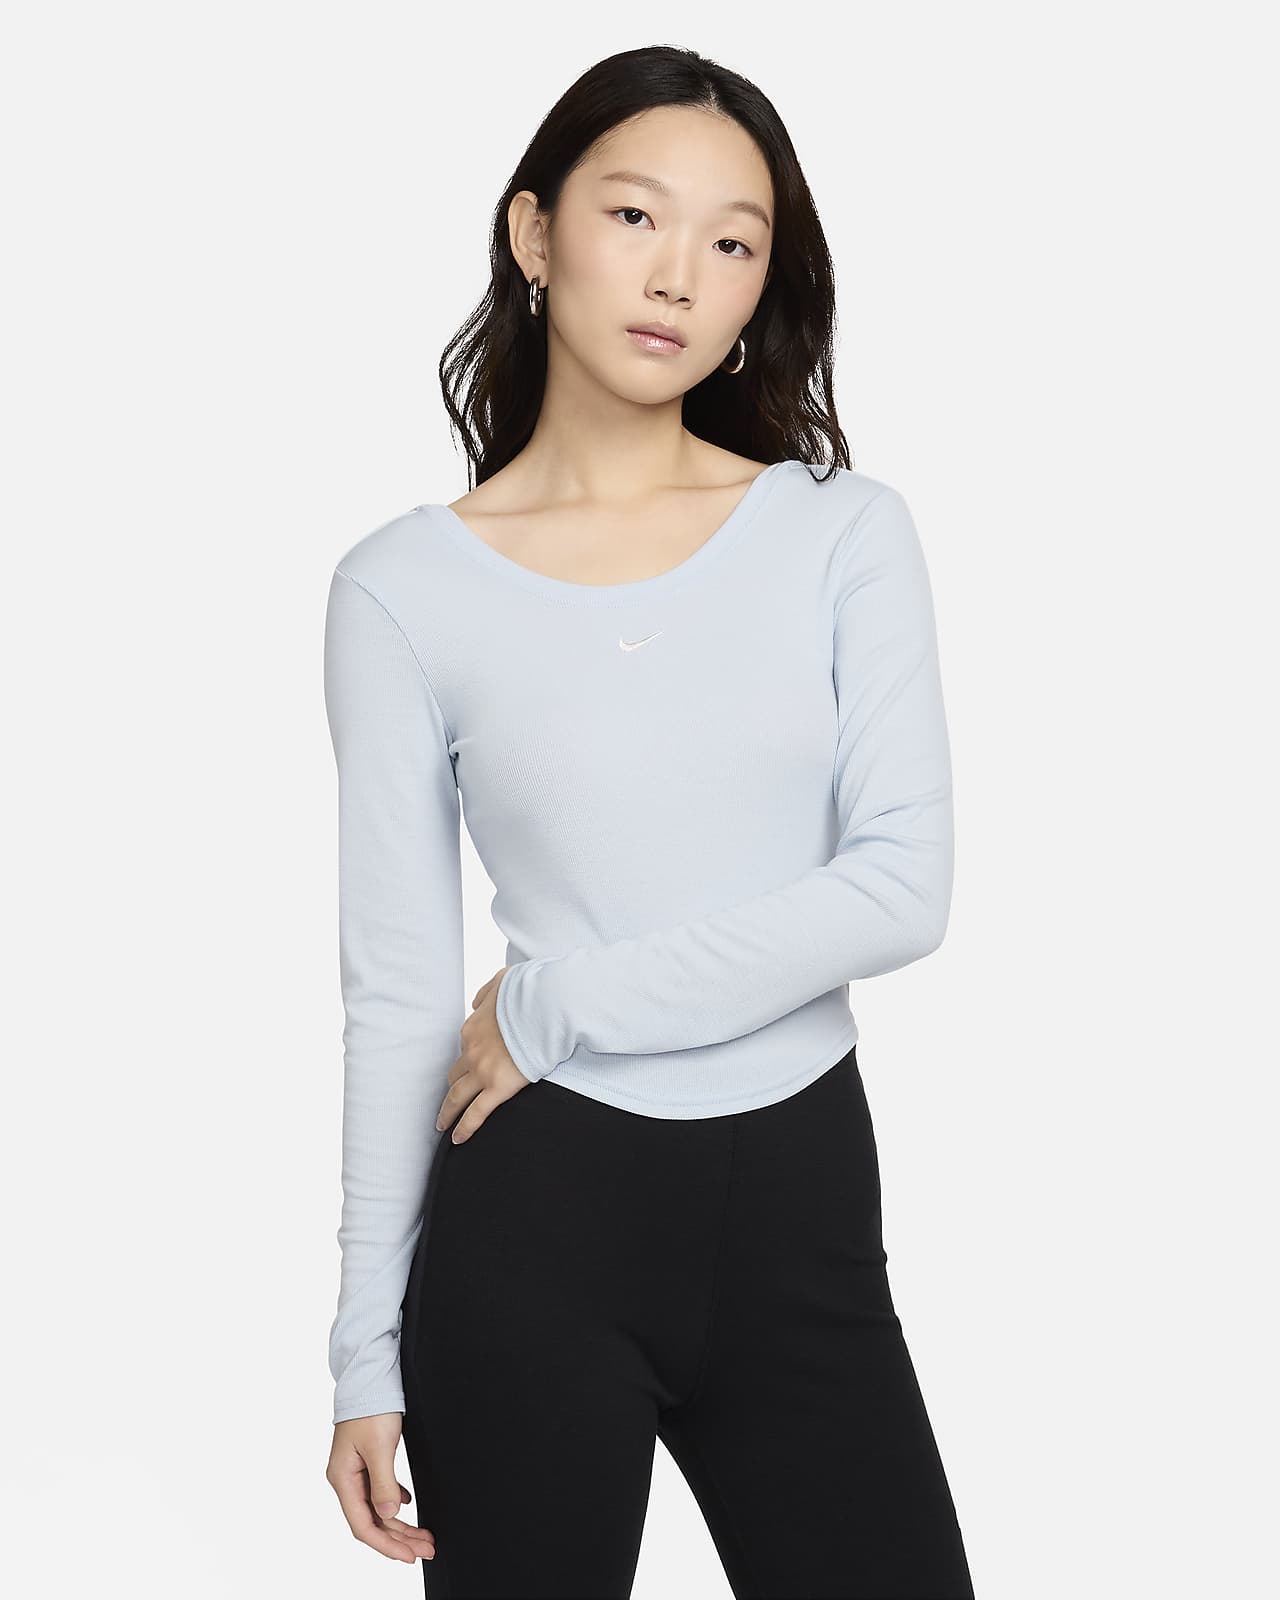 Adapt Soft Rib Scoop Neck Long Sleeve Top in White